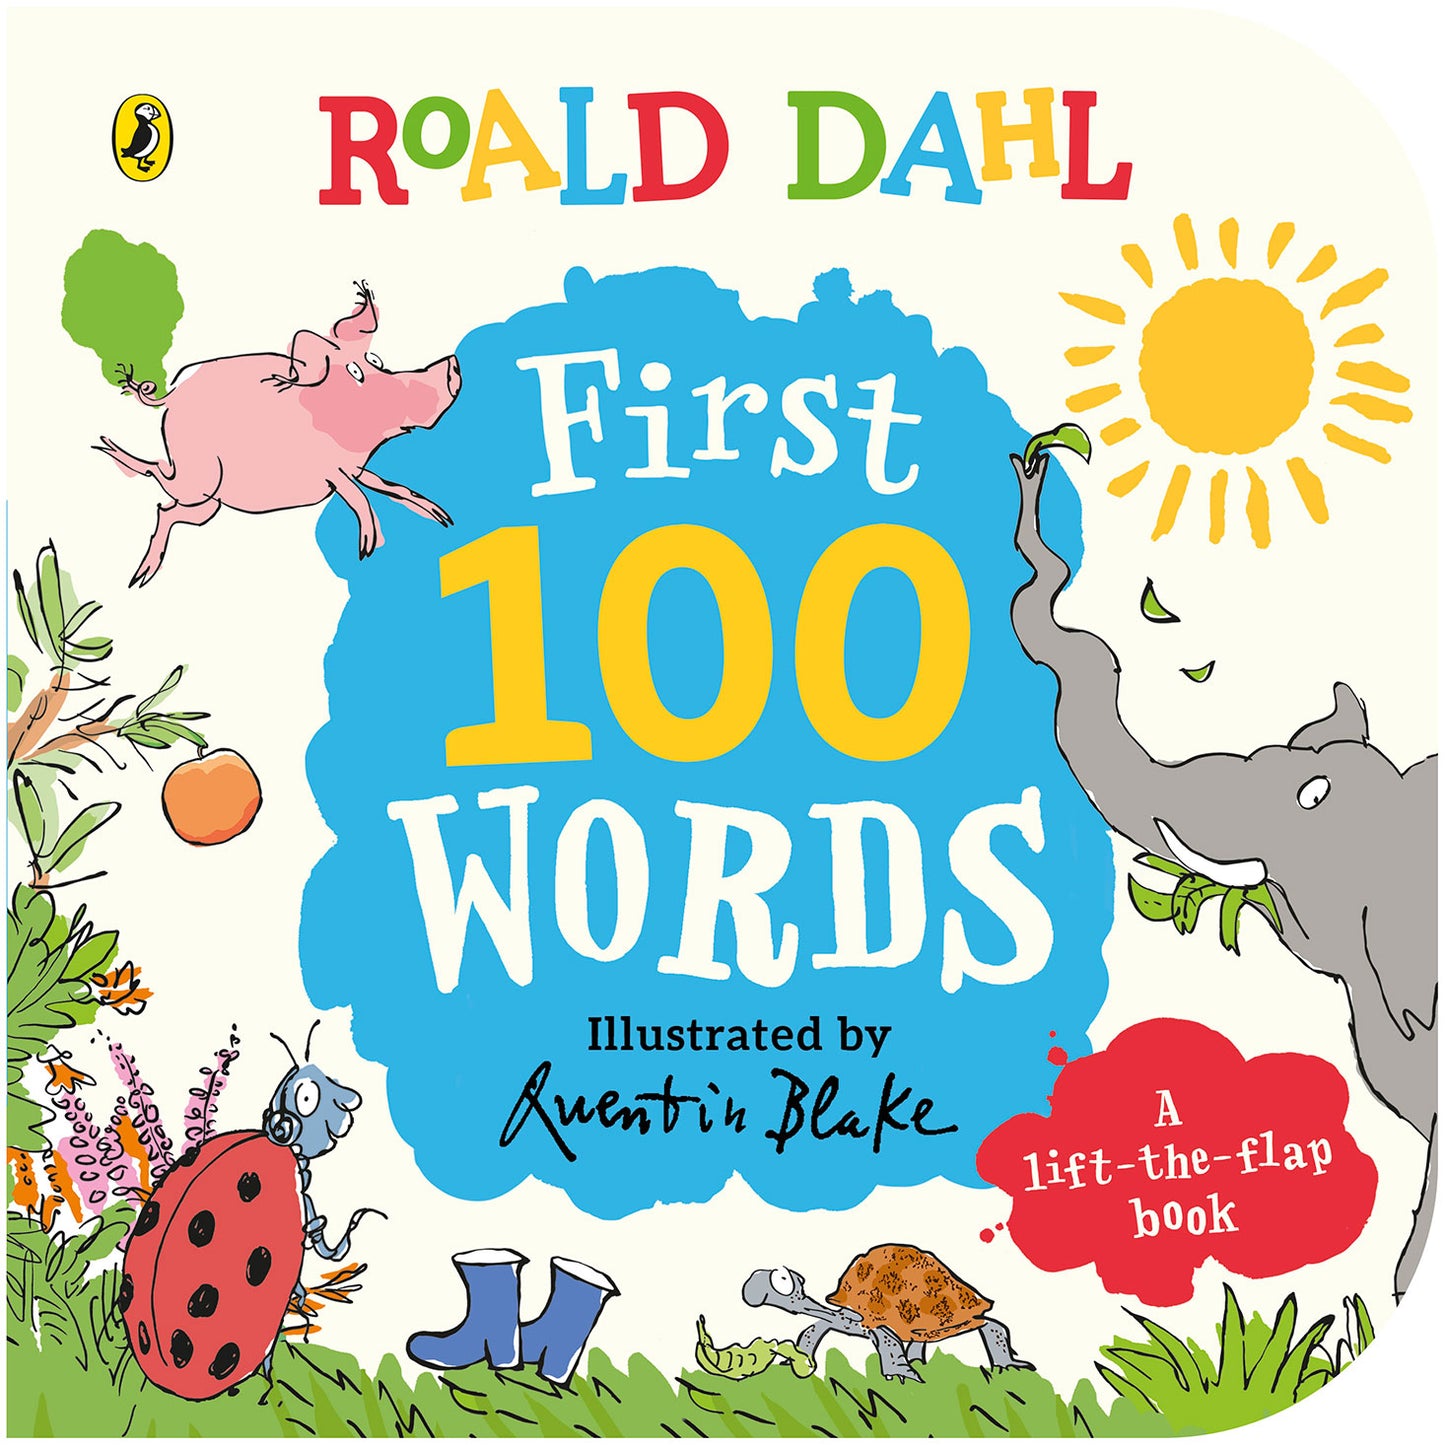 Roald Dahl's First 100 Words, a board book for toddlers